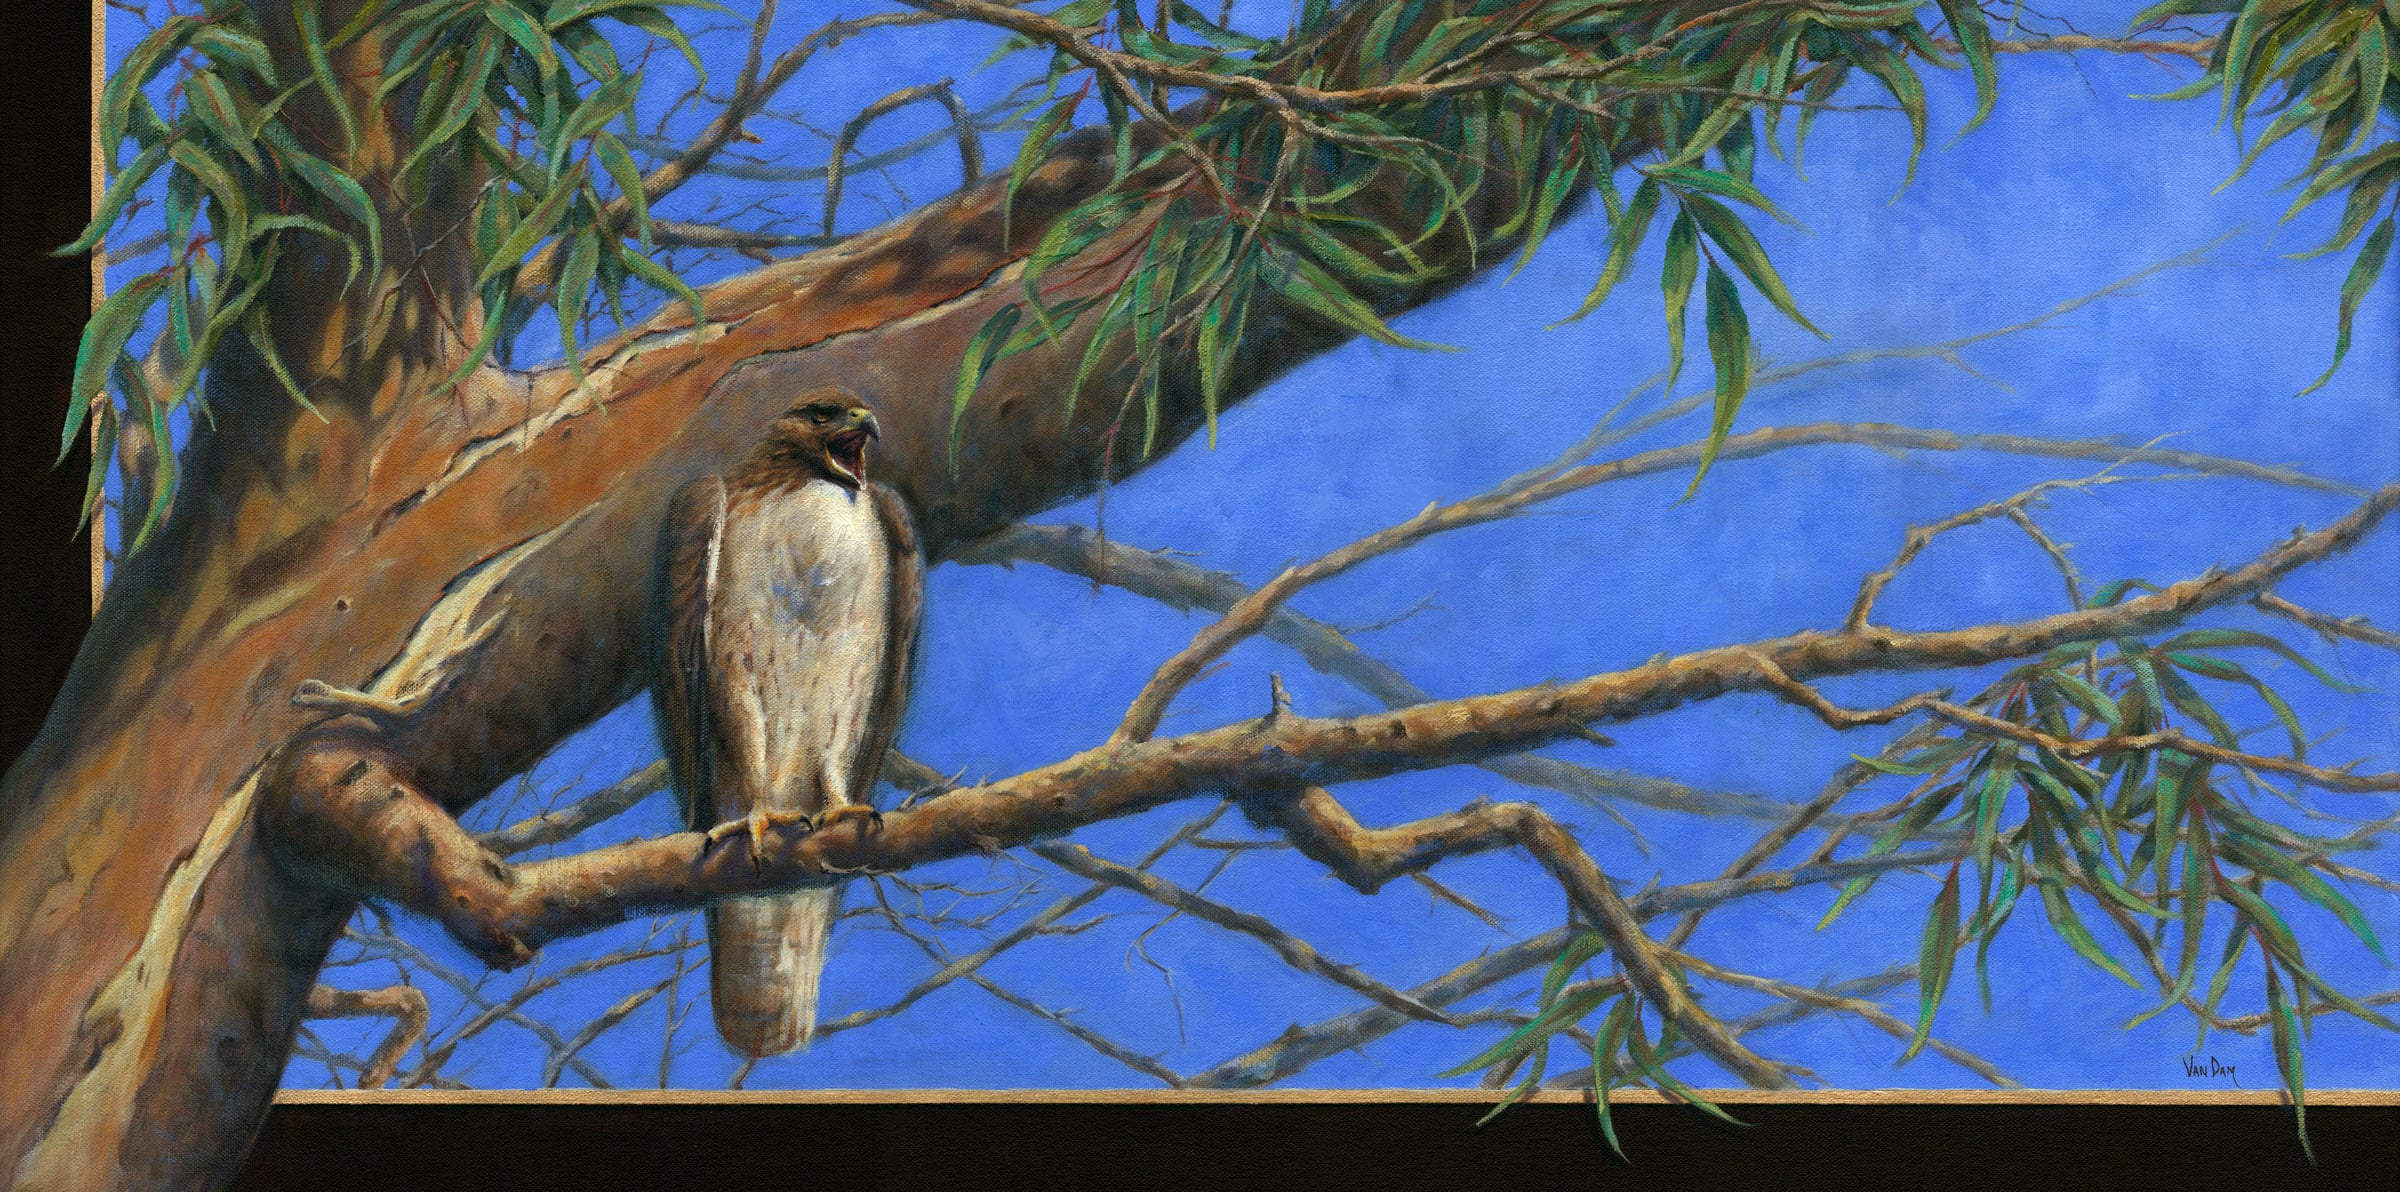 Hawk Perched in Tree which starts outside the picture frame